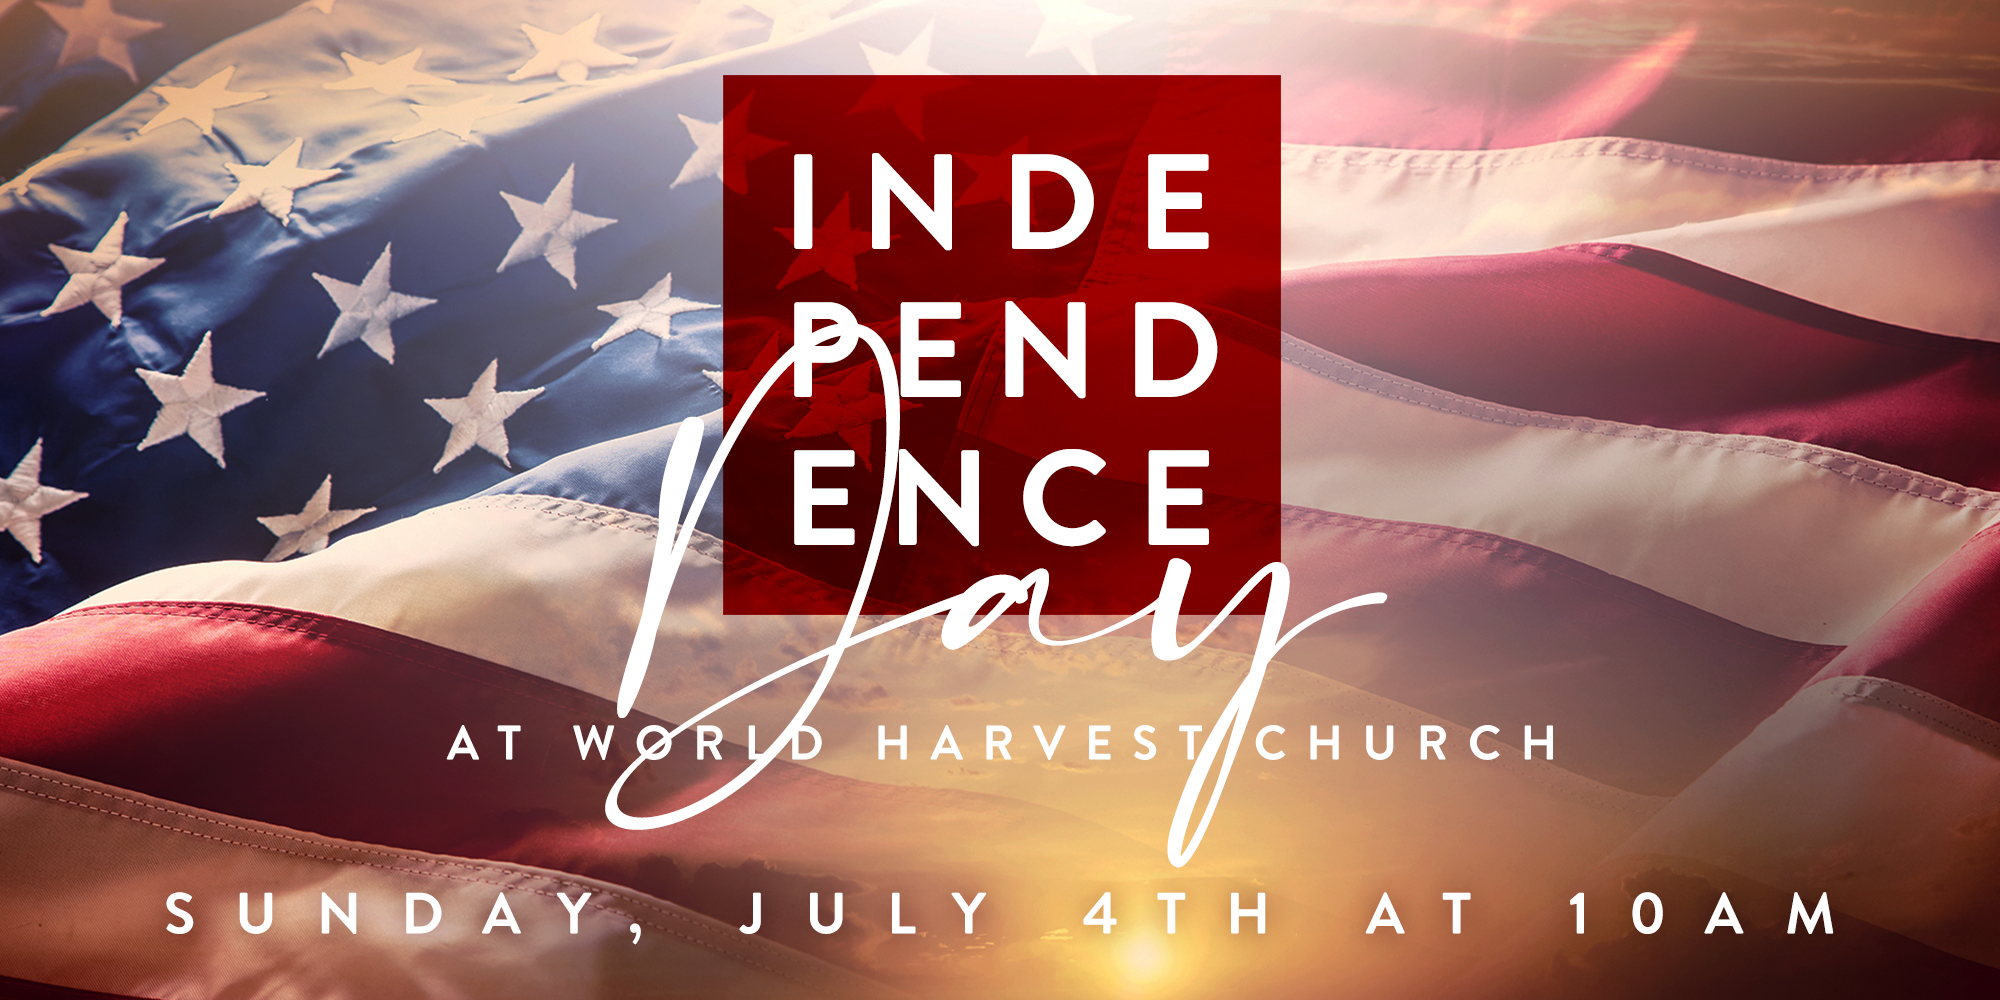 Independence Day at World Harvest Church Sunday, July 4th at 10AM